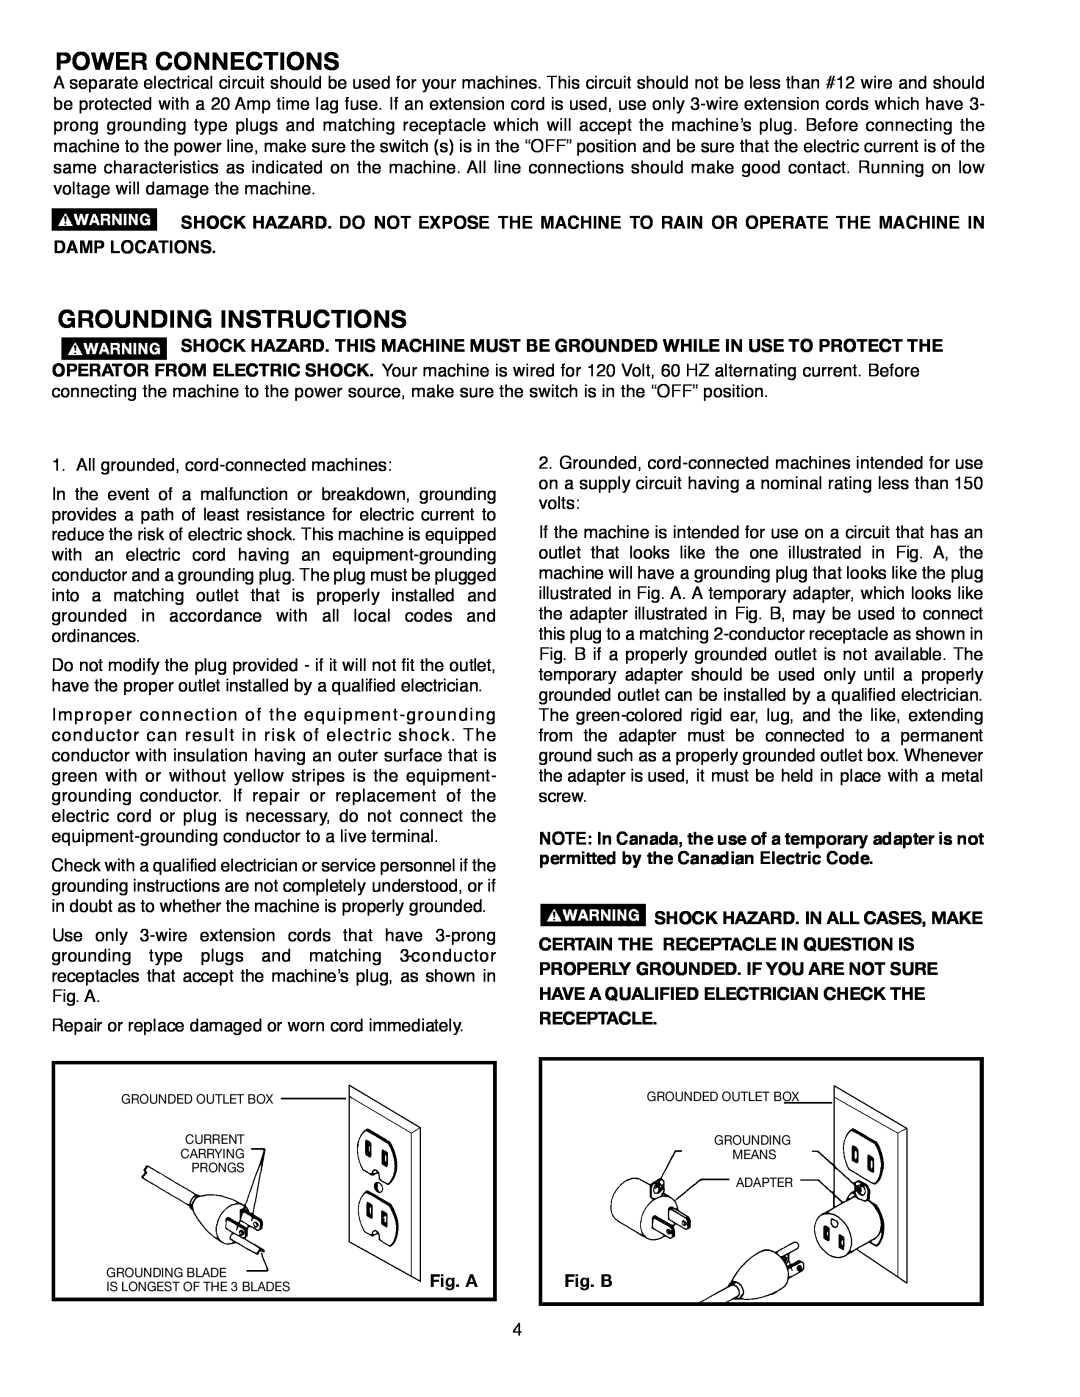 Delta SM300, 638517-00 warranty Power Connections, Grounding Instructions, Fig. A, Fig. B 